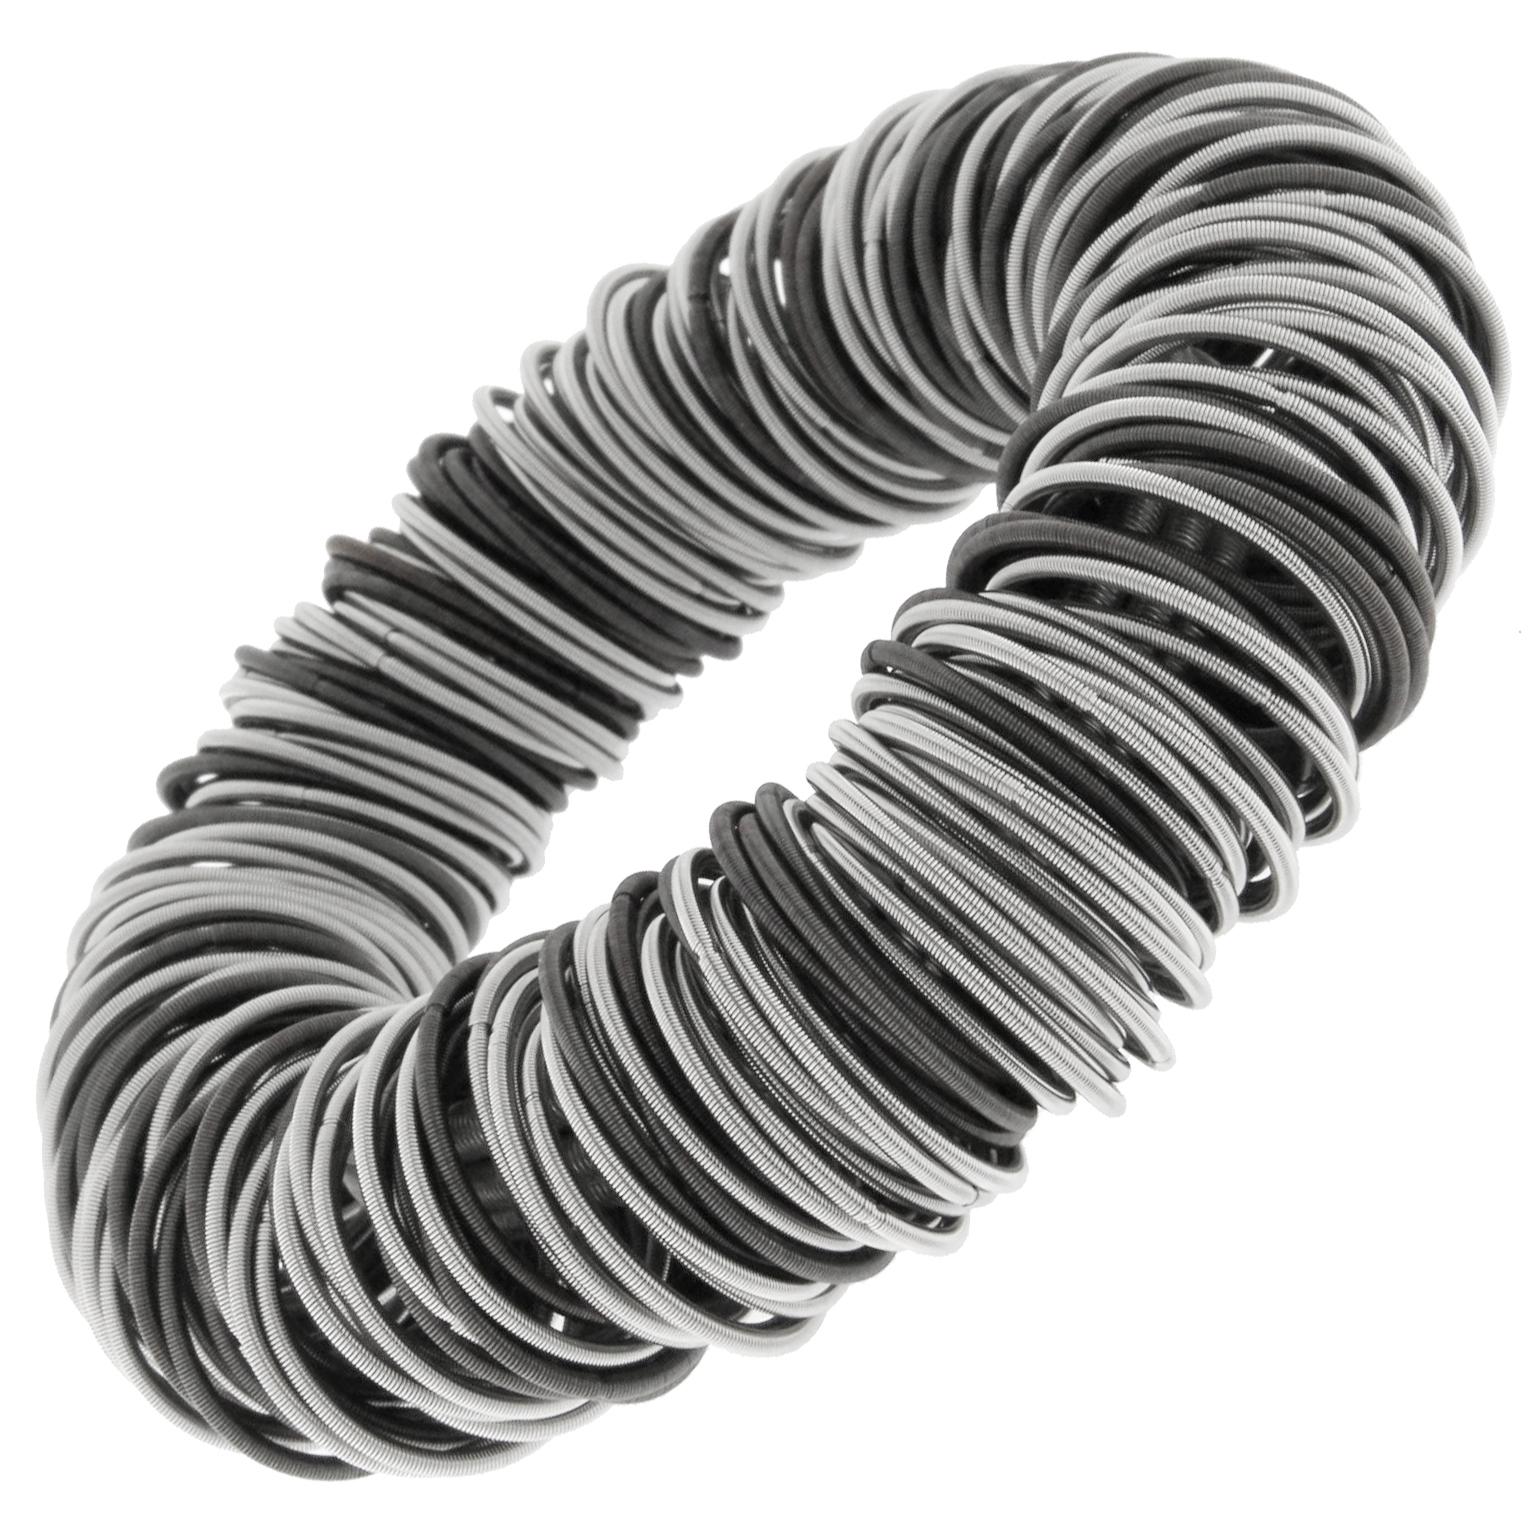 Maxi One Stainless Steel Spring Cuff Bracelet In New Condition For Sale In Torino, IT